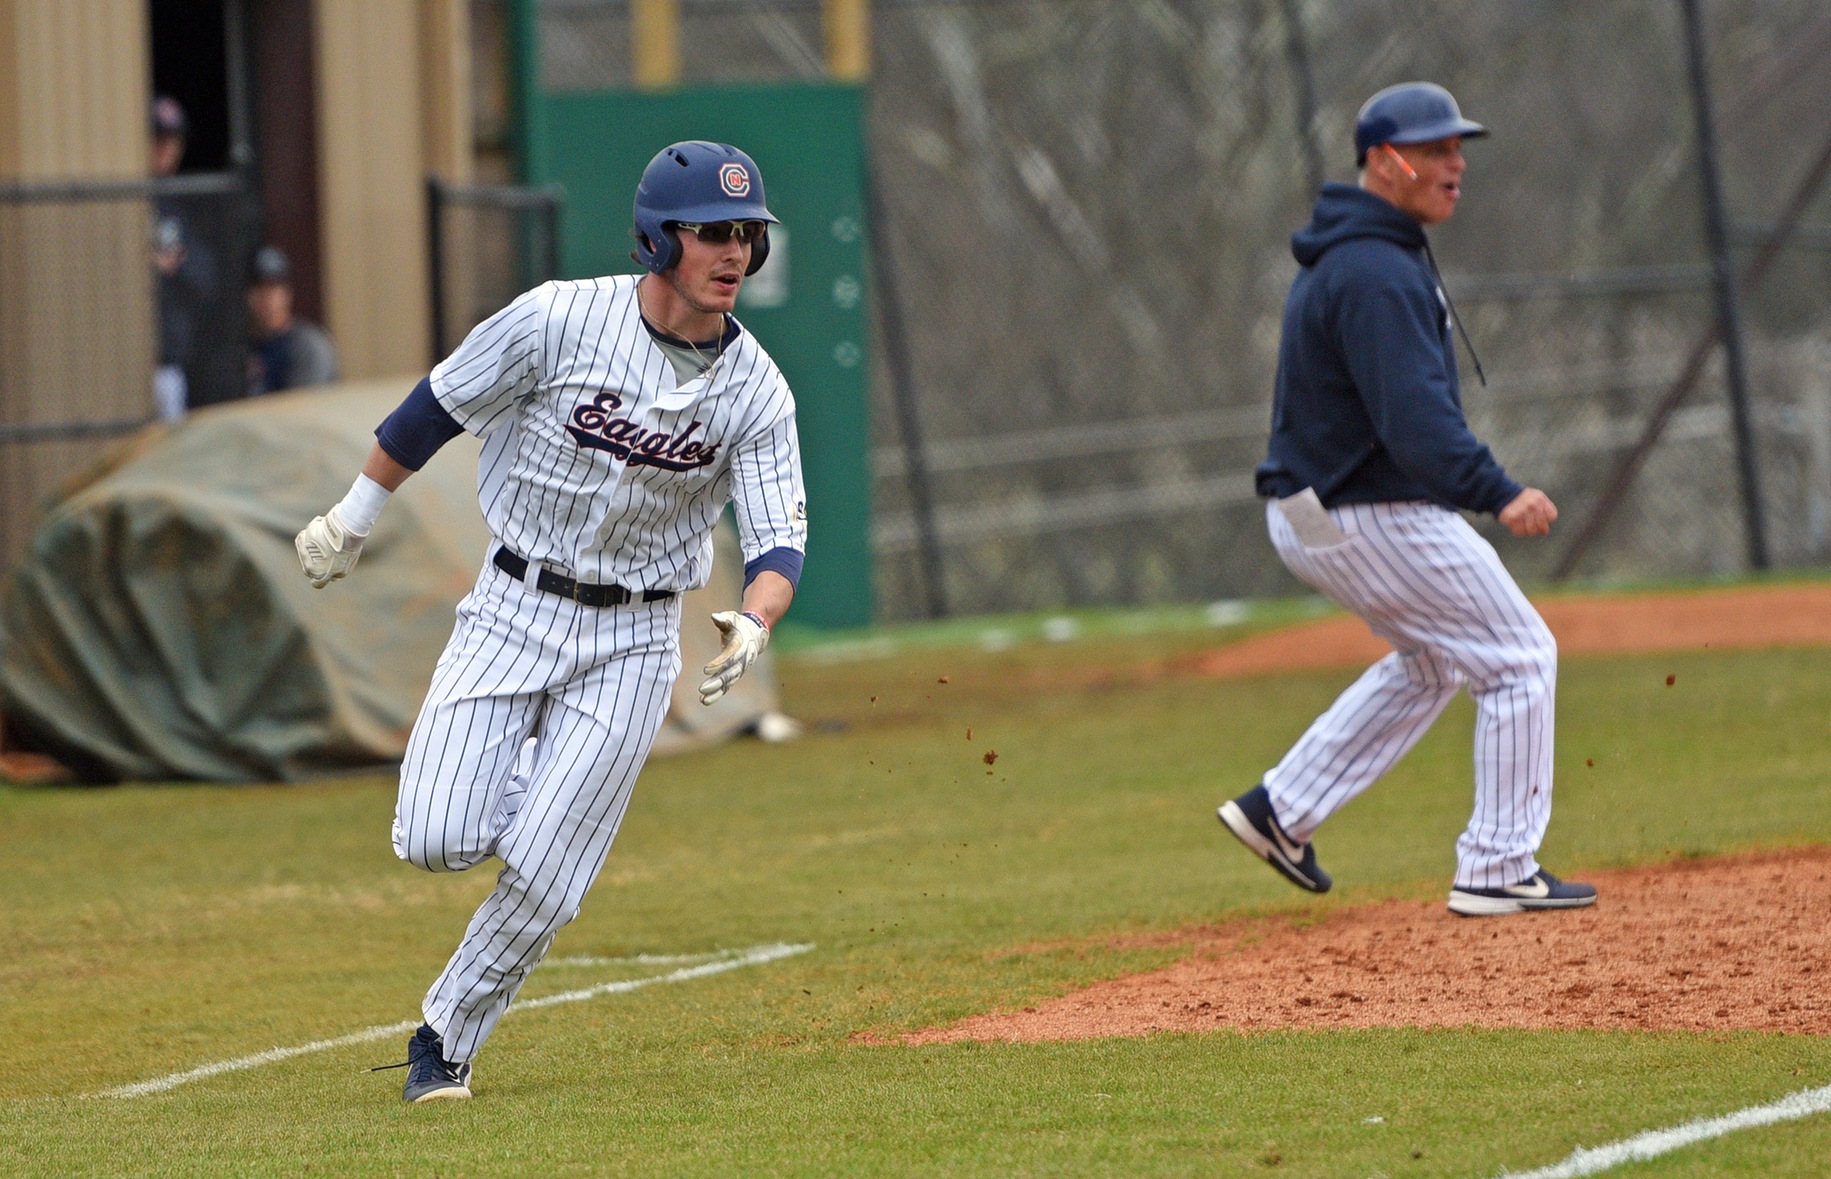 LMU pulls away from No. 25 C-N to seal sweep